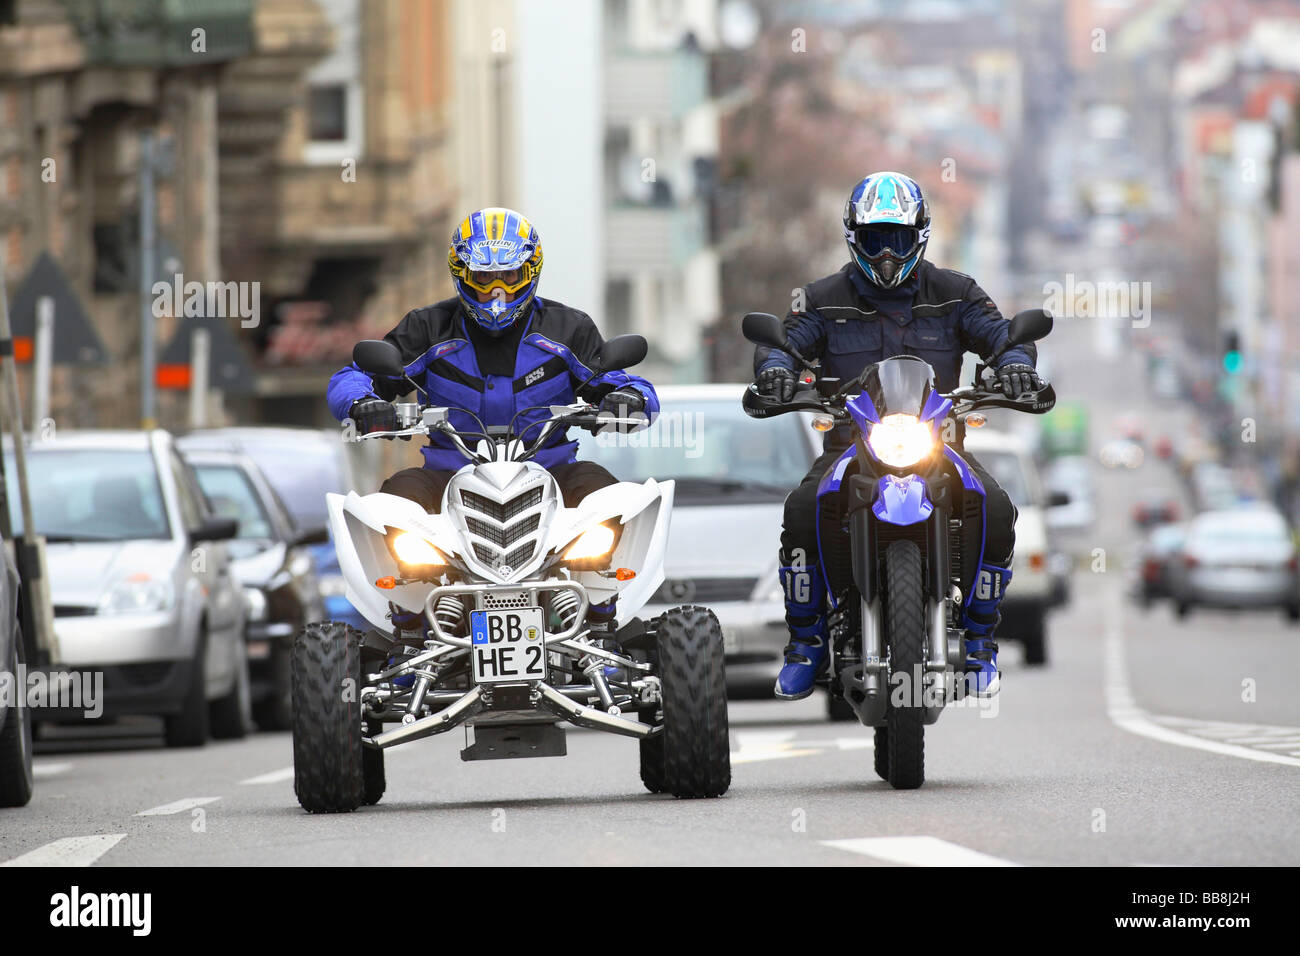 Quad and motorcycle, riding shot Stock Photo